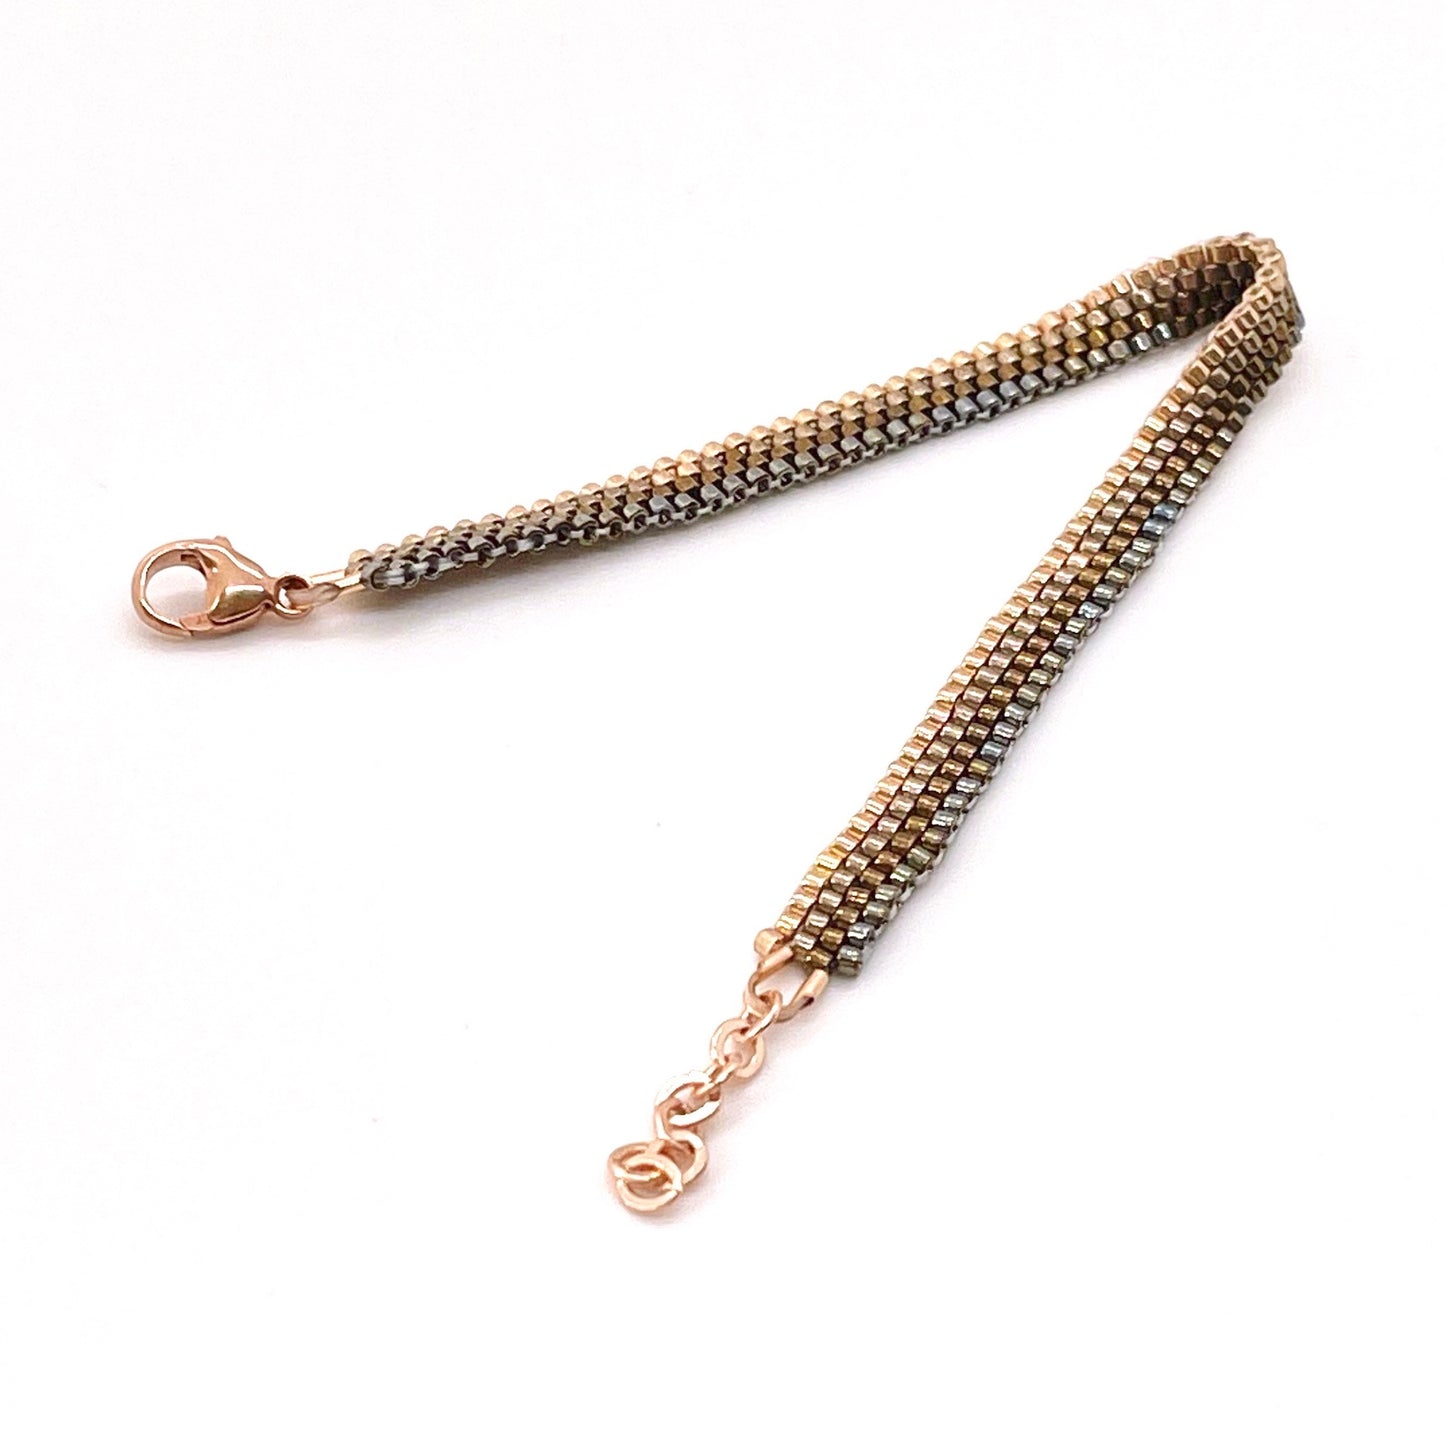 Horizontal stripes pewter/bronze metal tone seed bead  woven bracelet. Thin band with ombre stripe pattern.